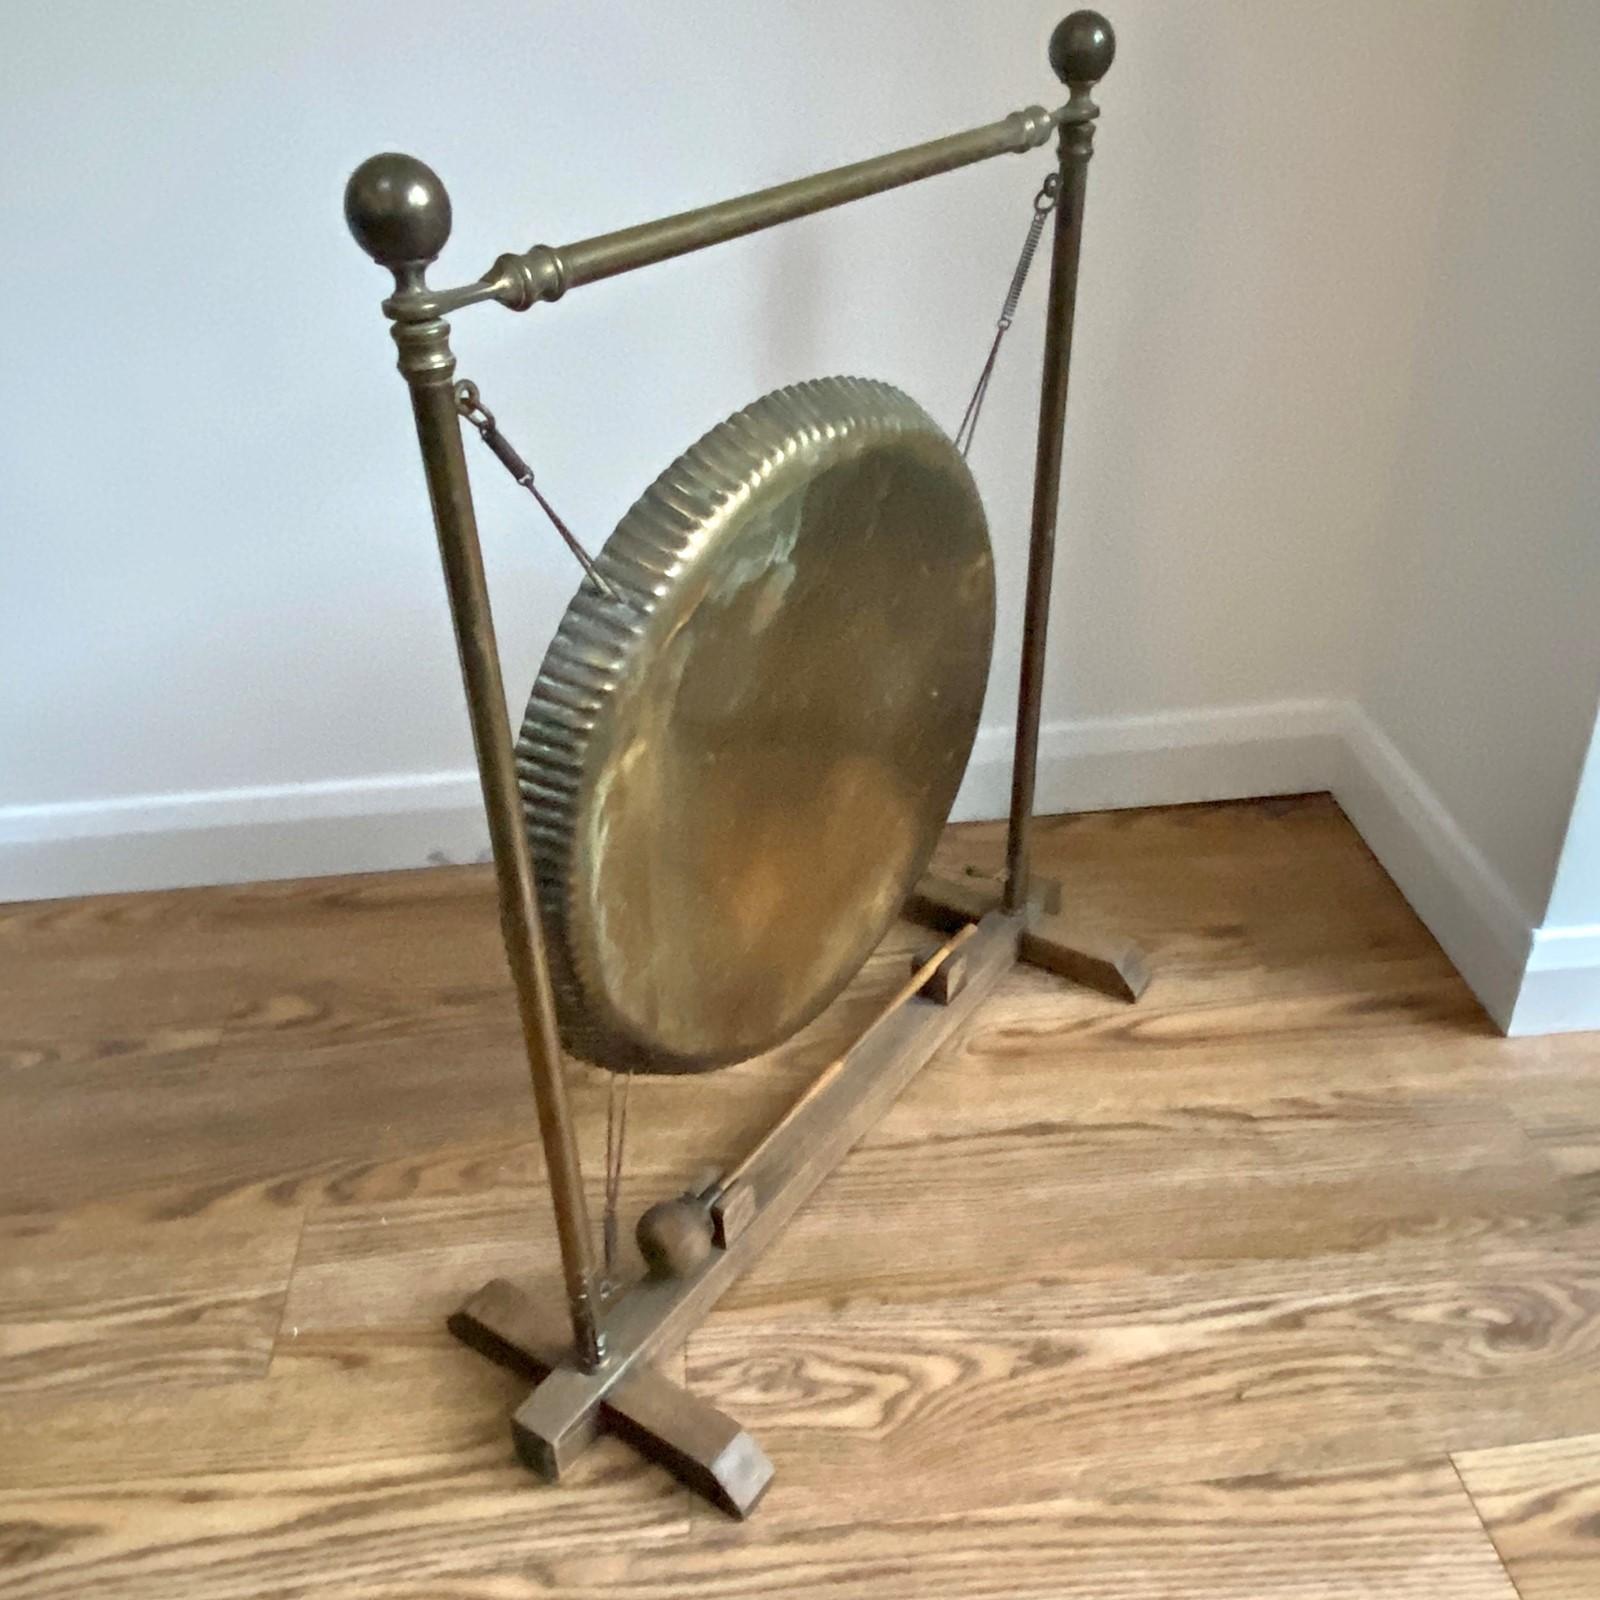 A vintage brass and oak framed dinner gong. The brass frame with finials and inset sprung gong. Standing on an oak base with rest for the original bamboo and leather beater. The wood has since been cleaned and polished and the leather nourished.